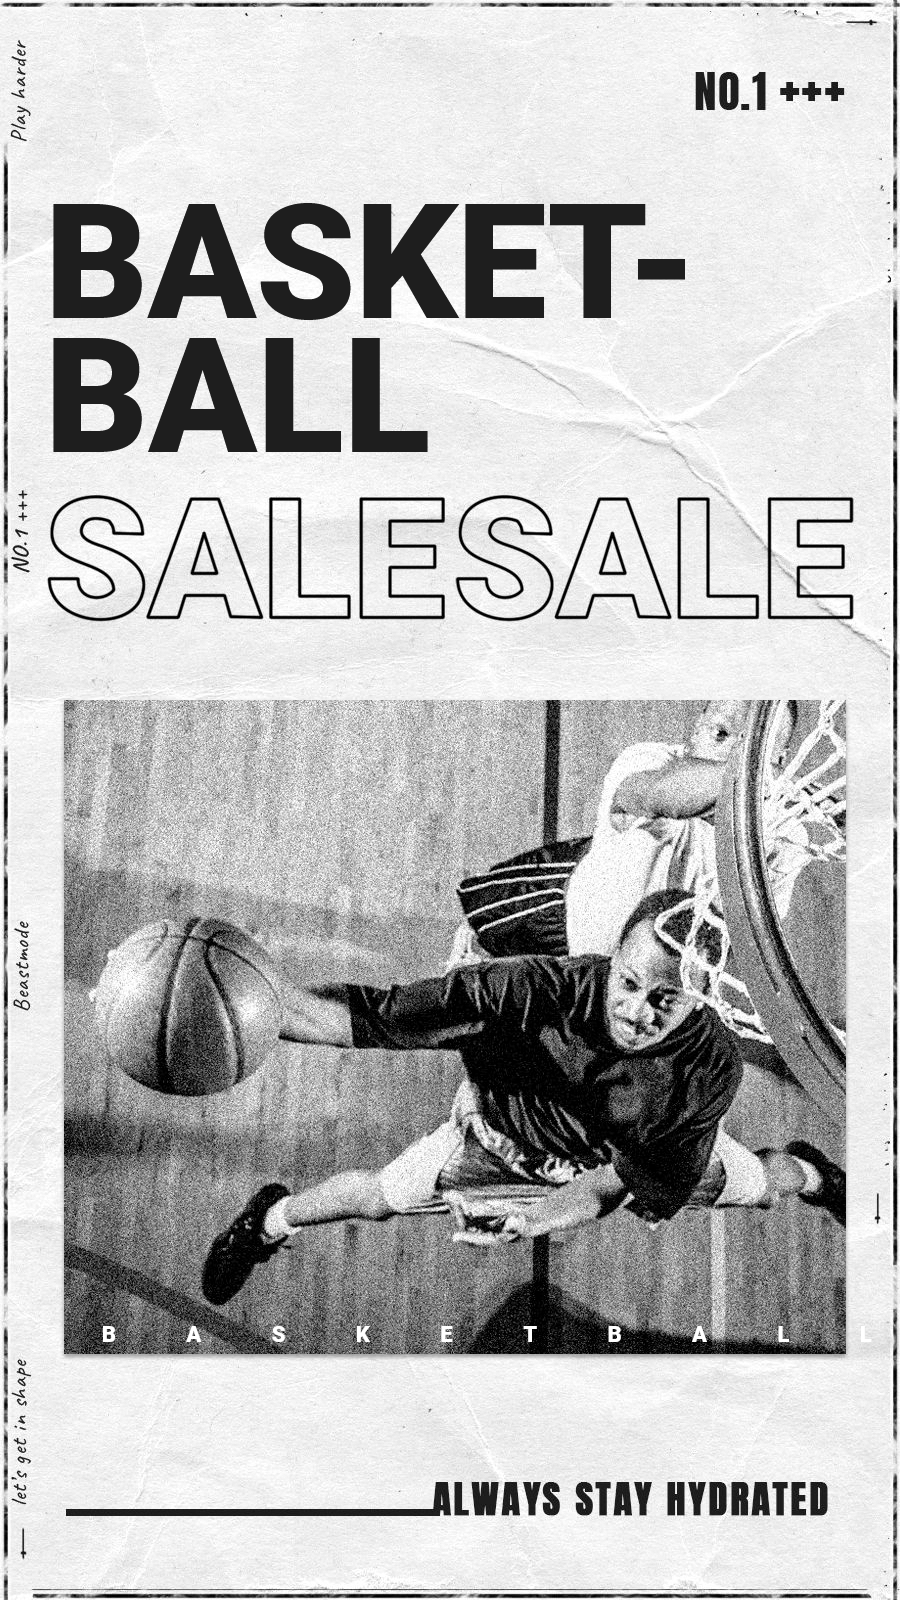 Creative Basketball Sale Introduction Instagram Story预览效果